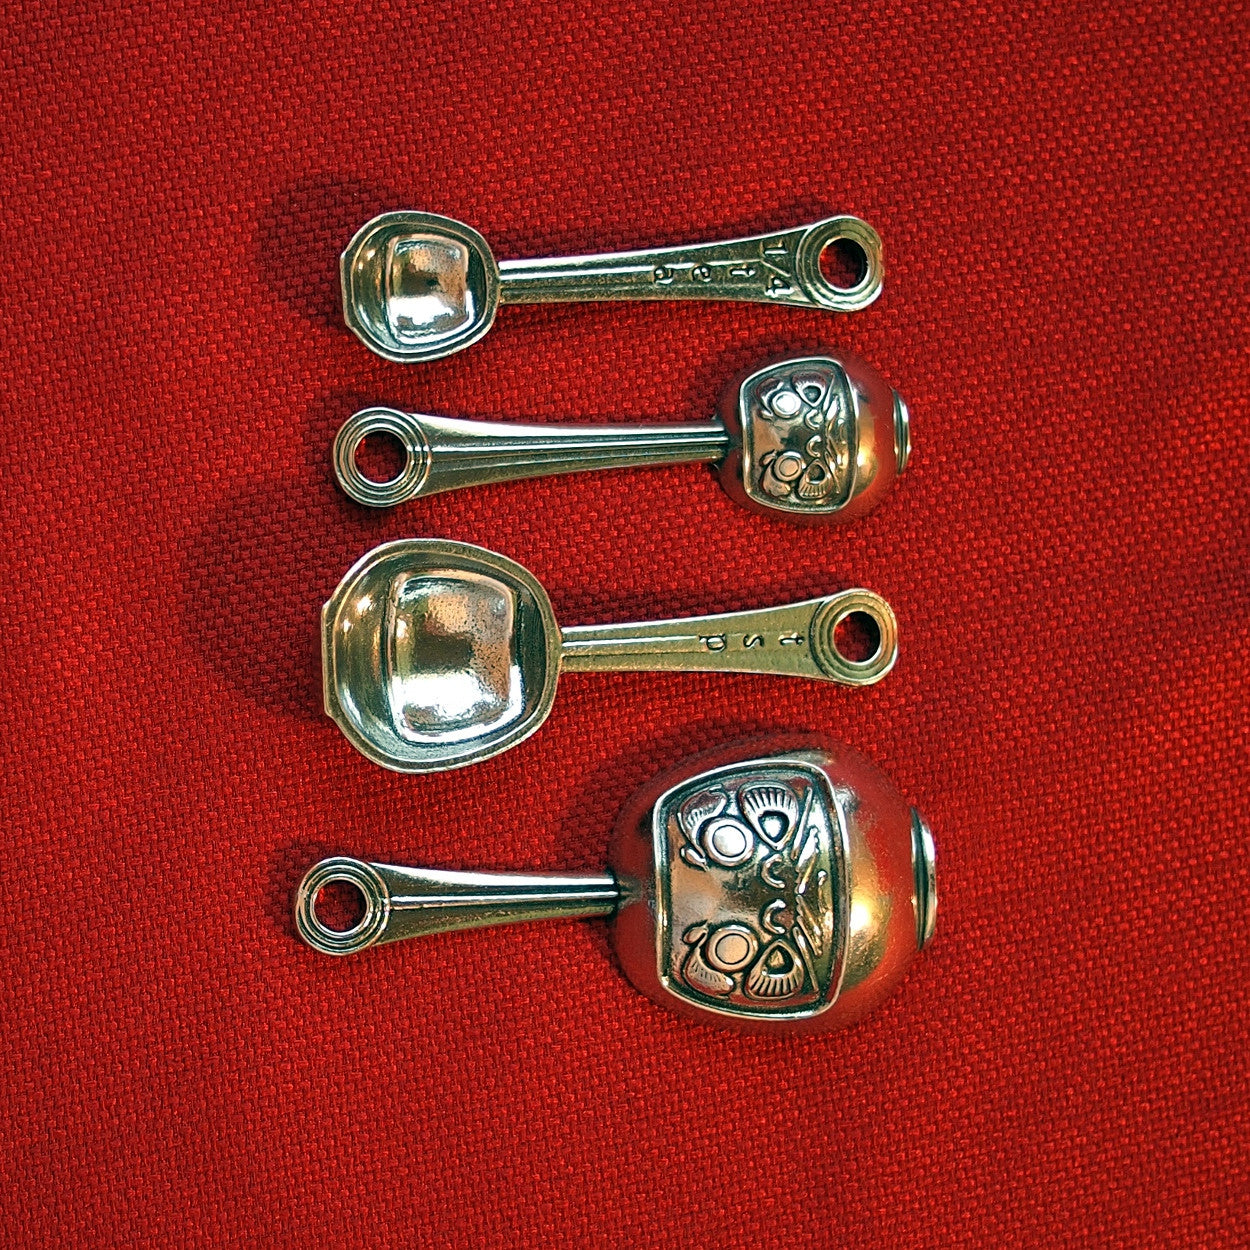 Daruma Measuring Spoons-Dharma Spoons of Luck and Perseverance